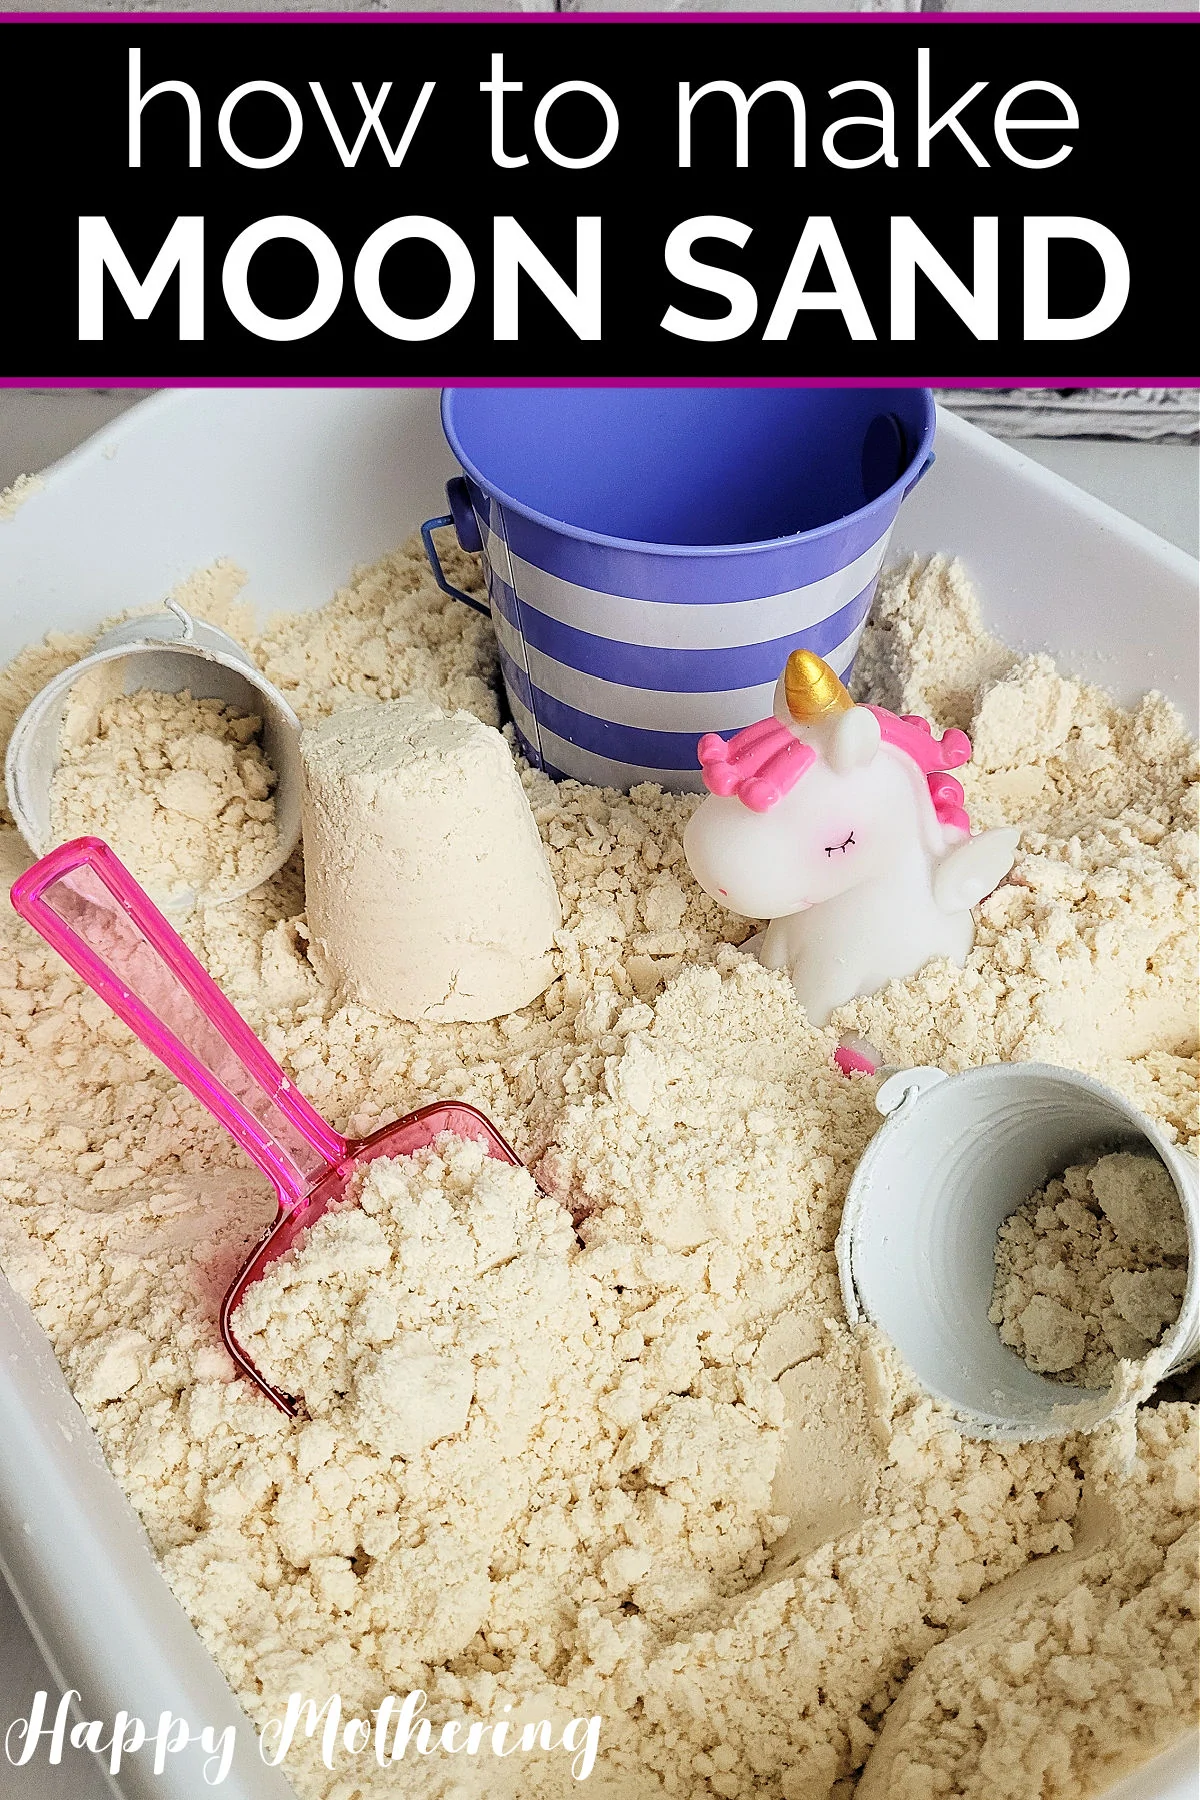 Moon sand that has been shaped with a measuring cup